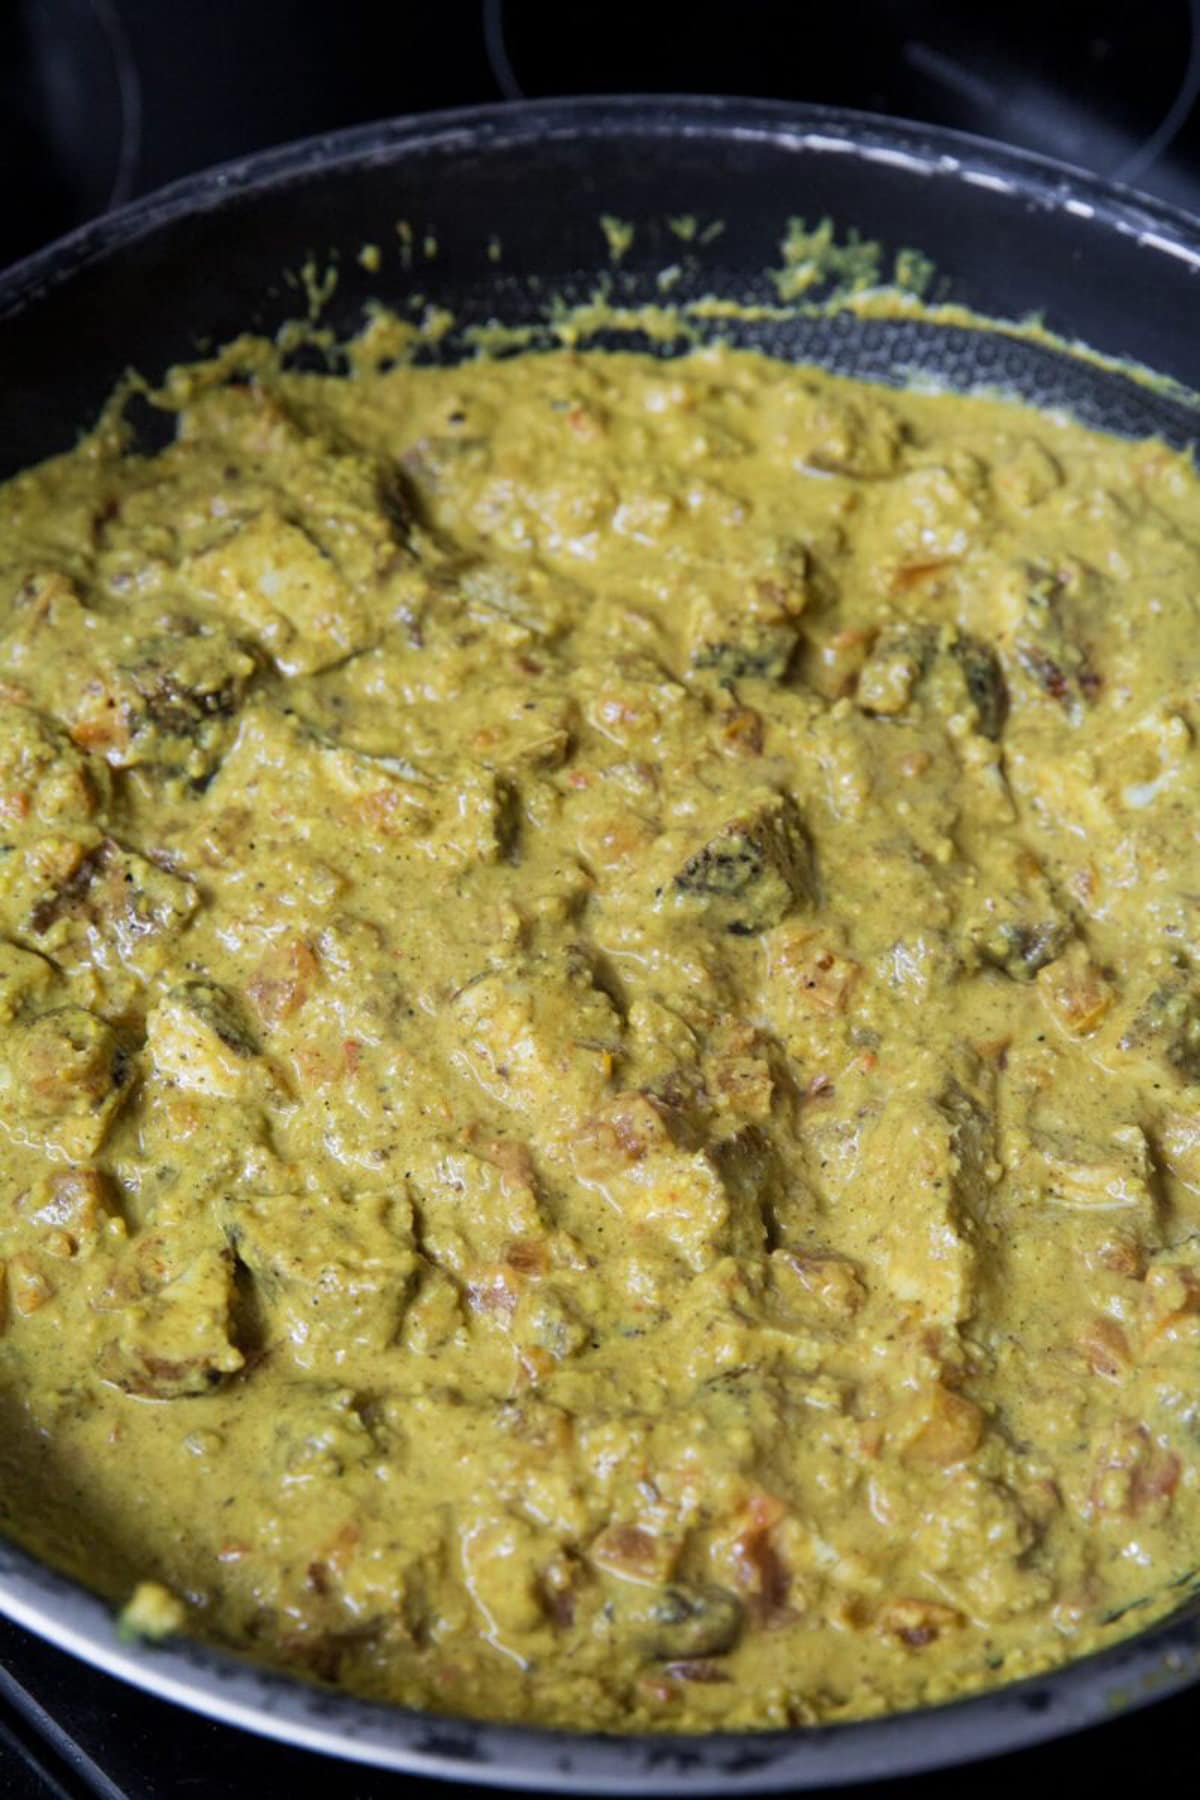 Chicken korma sauce and chicken all mixed together in the skillet.